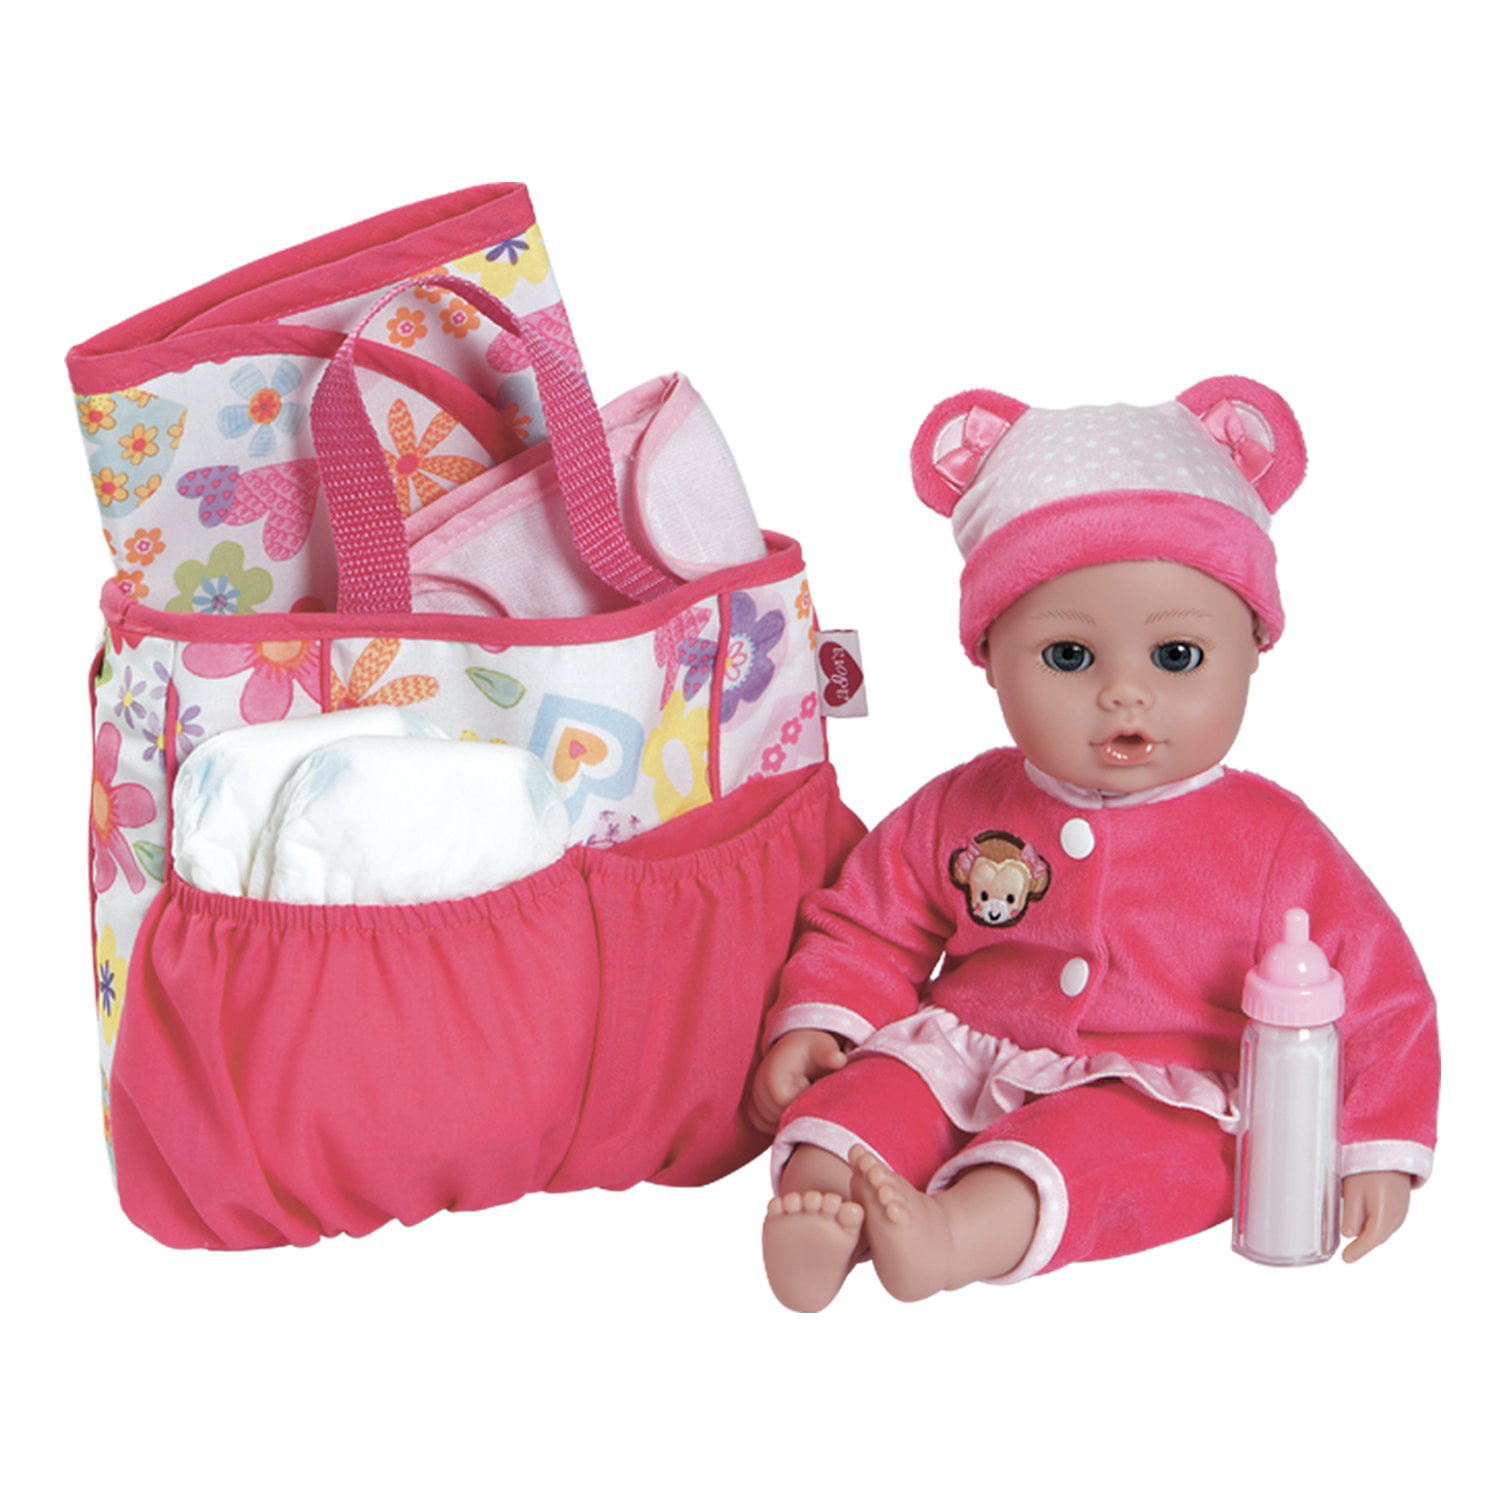 Adora Baby Doll Diaper Bag Accessories With 5-Piece Changing Set